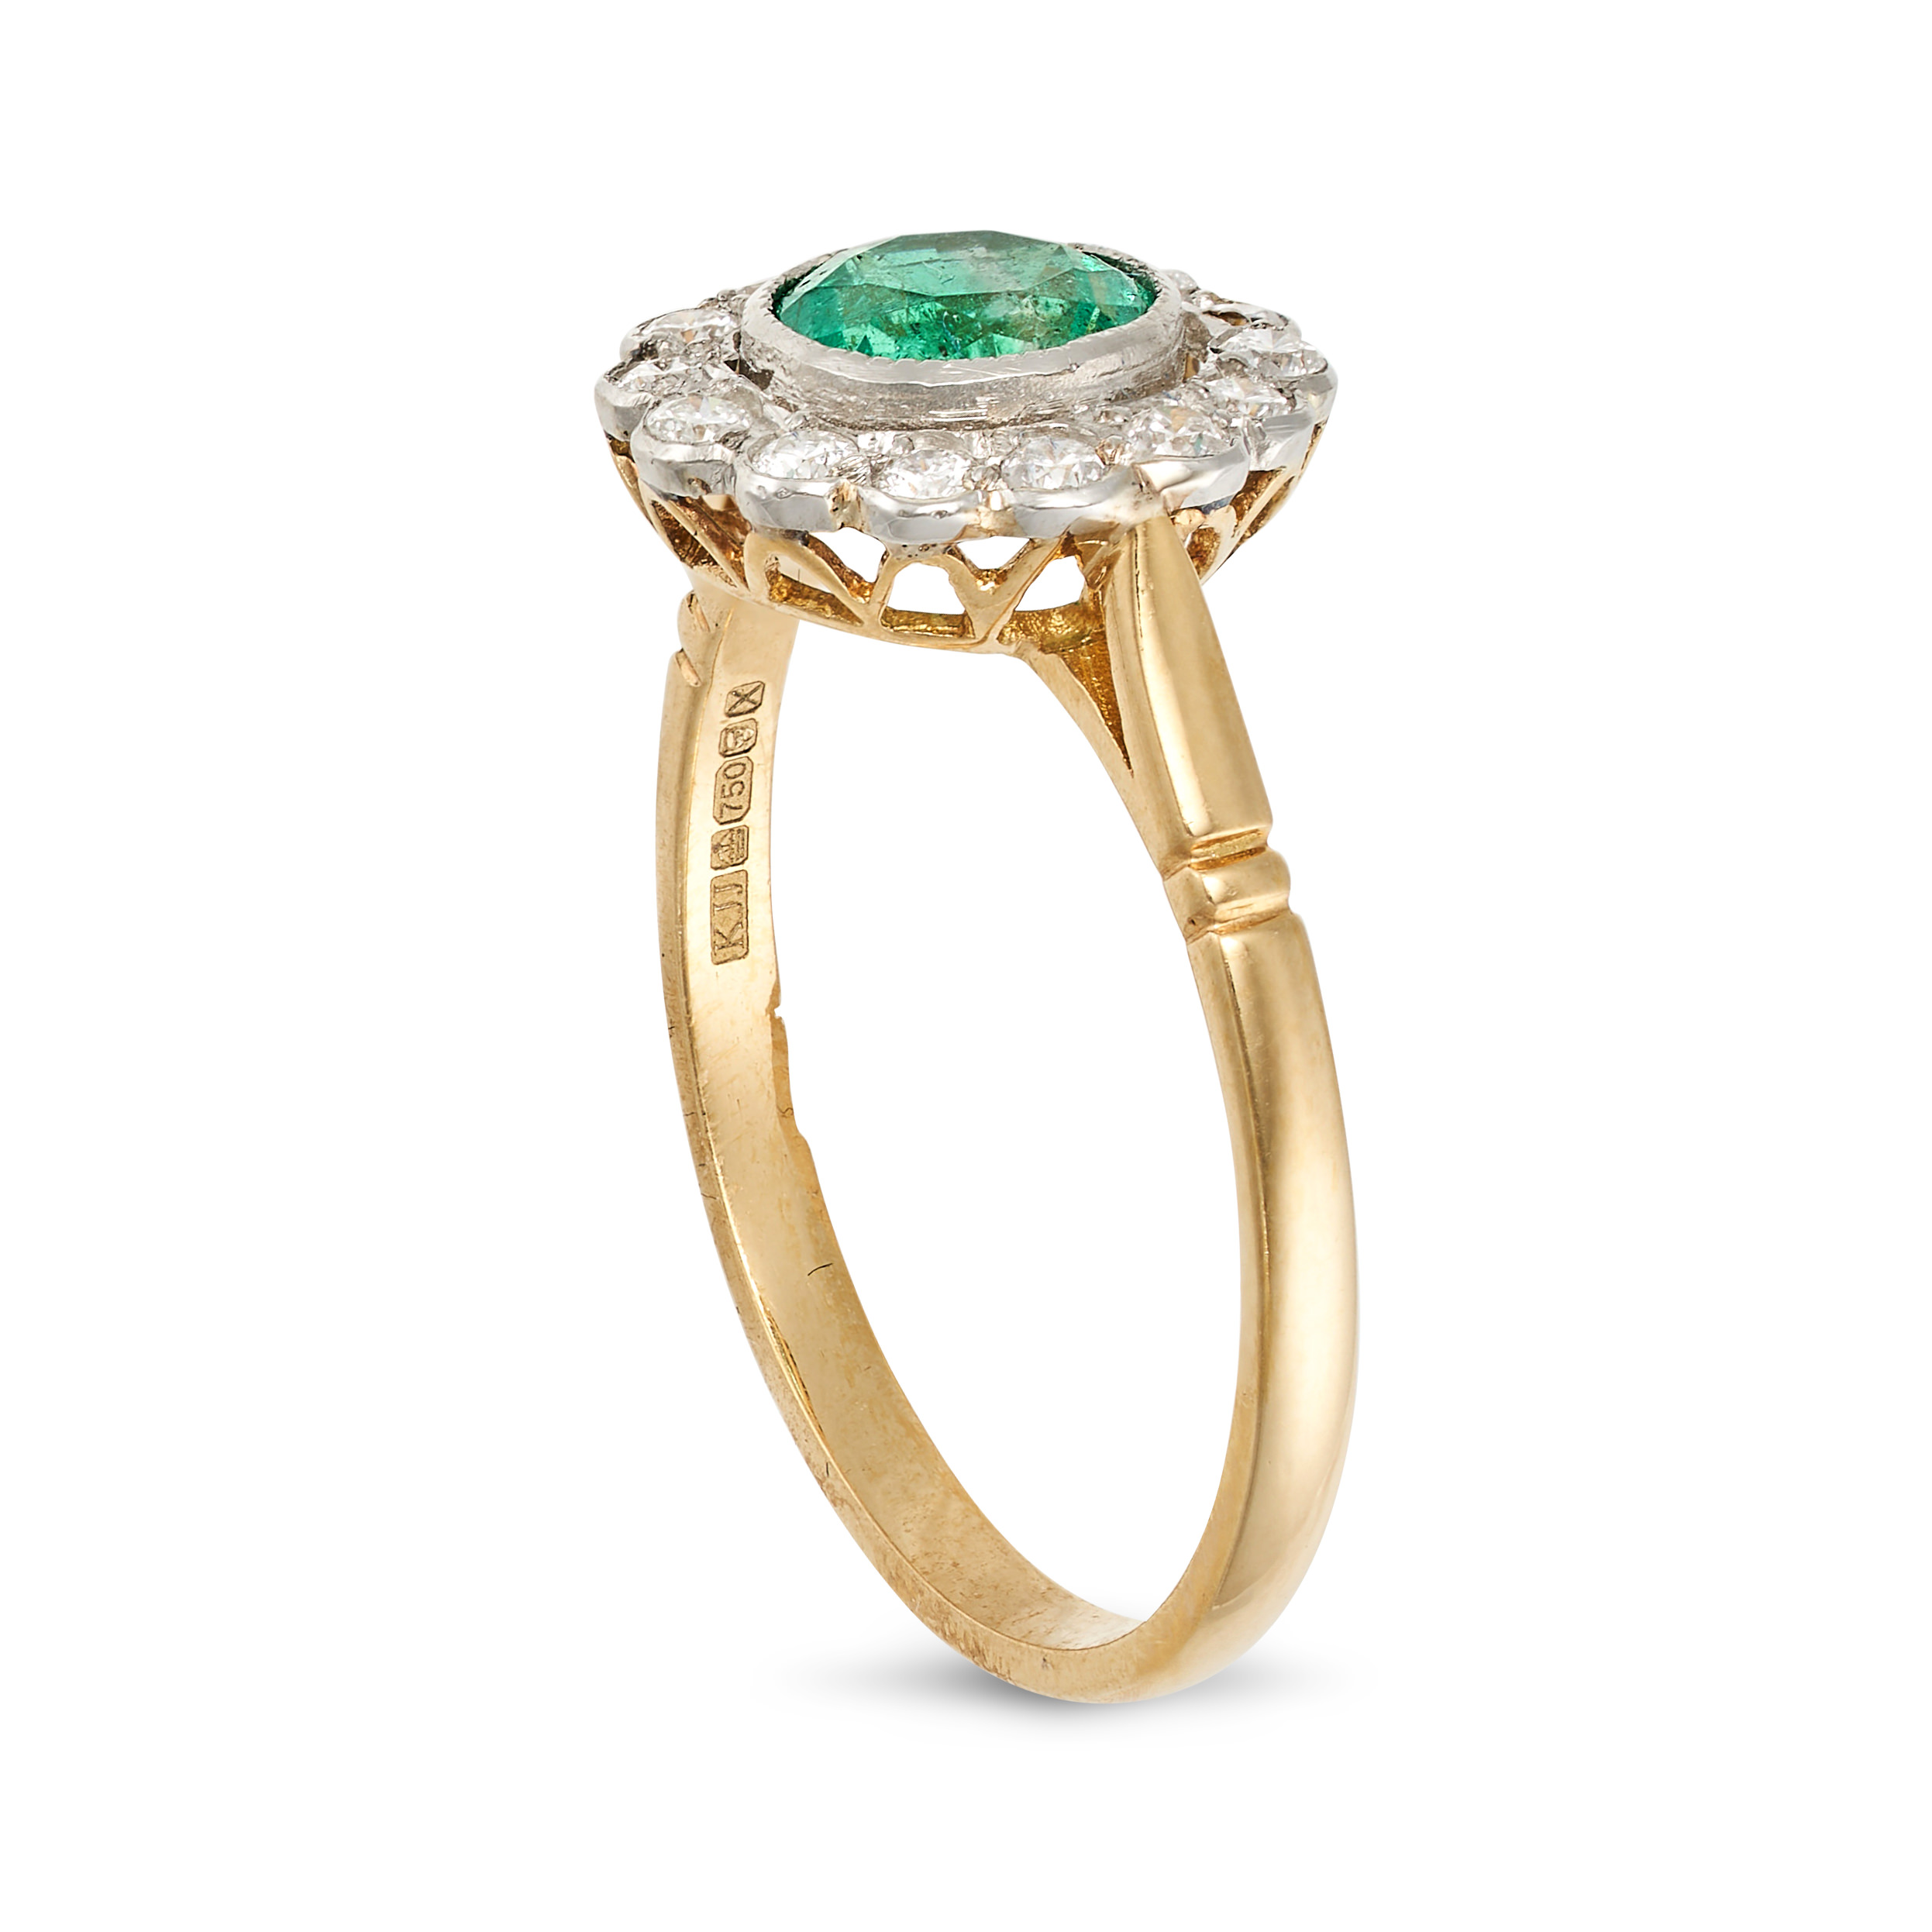 NO RESERVE - AN EMERALD AND DIAMOND CLUSTER RING in 18ct yellow and white gold, set with a round ... - Image 2 of 2